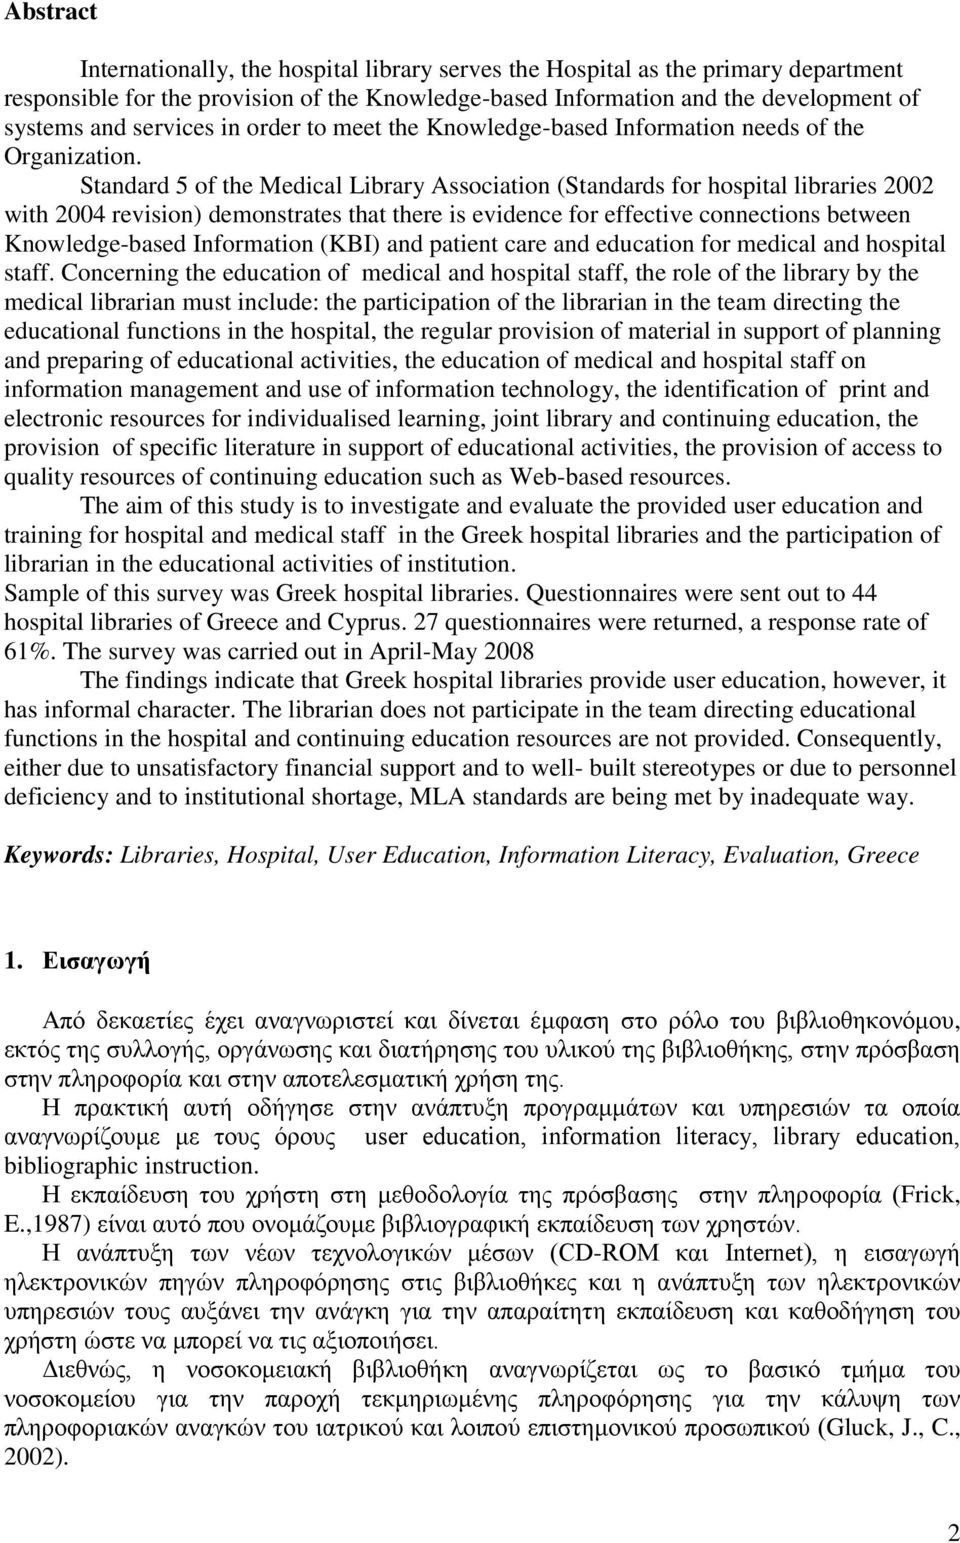 Standard 5 of the Medical Library Association (Standards for hospital libraries 2002 with 2004 revision) demonstrates that there is evidence for effective connections between Knowledge-based